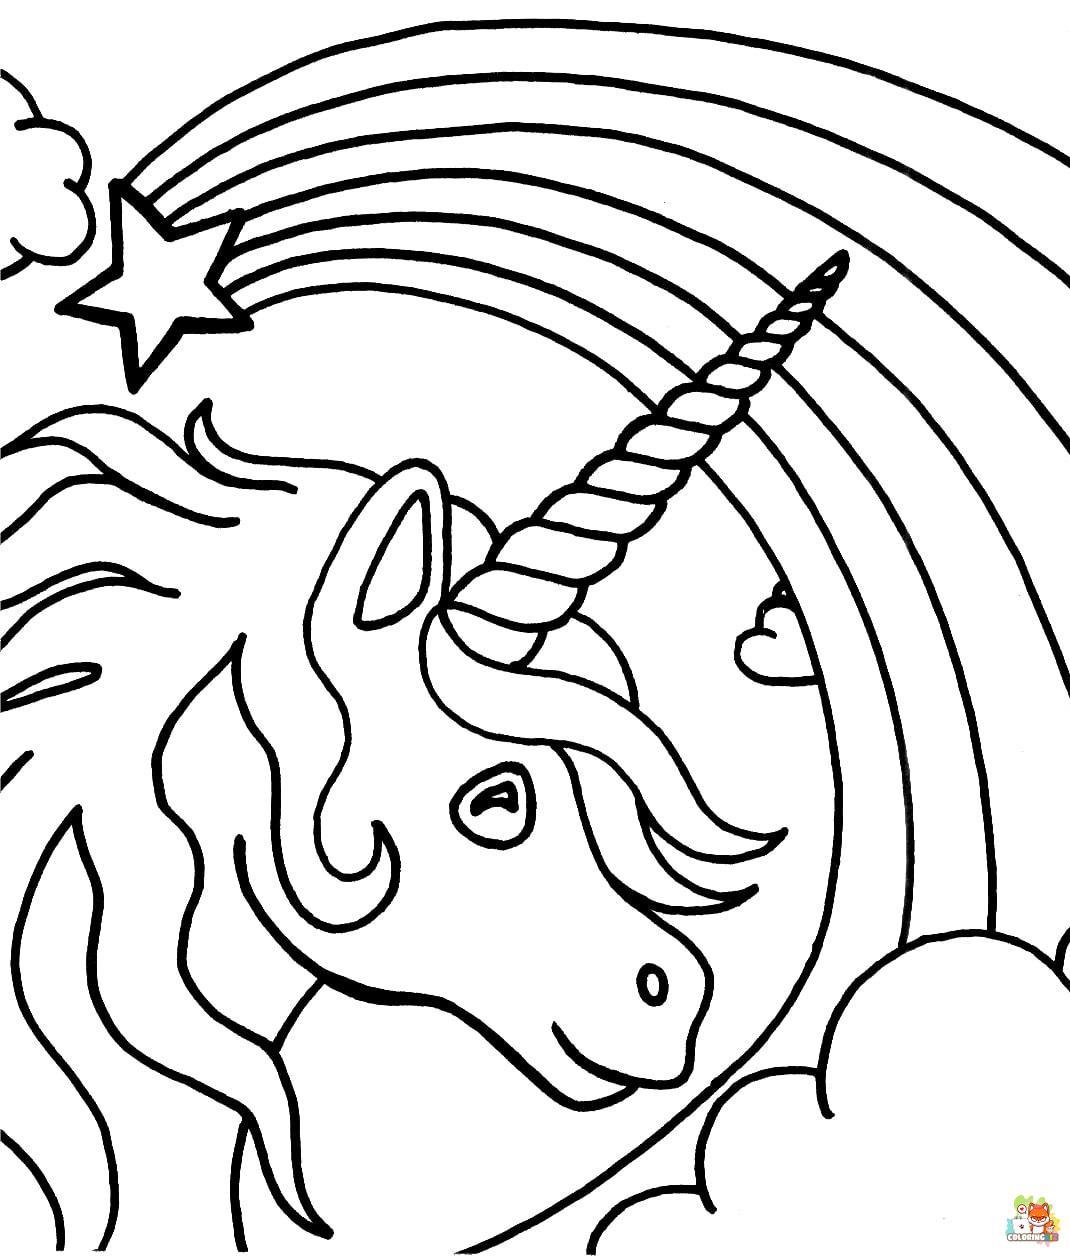 Unicorn head with rainbow coloring pages 1